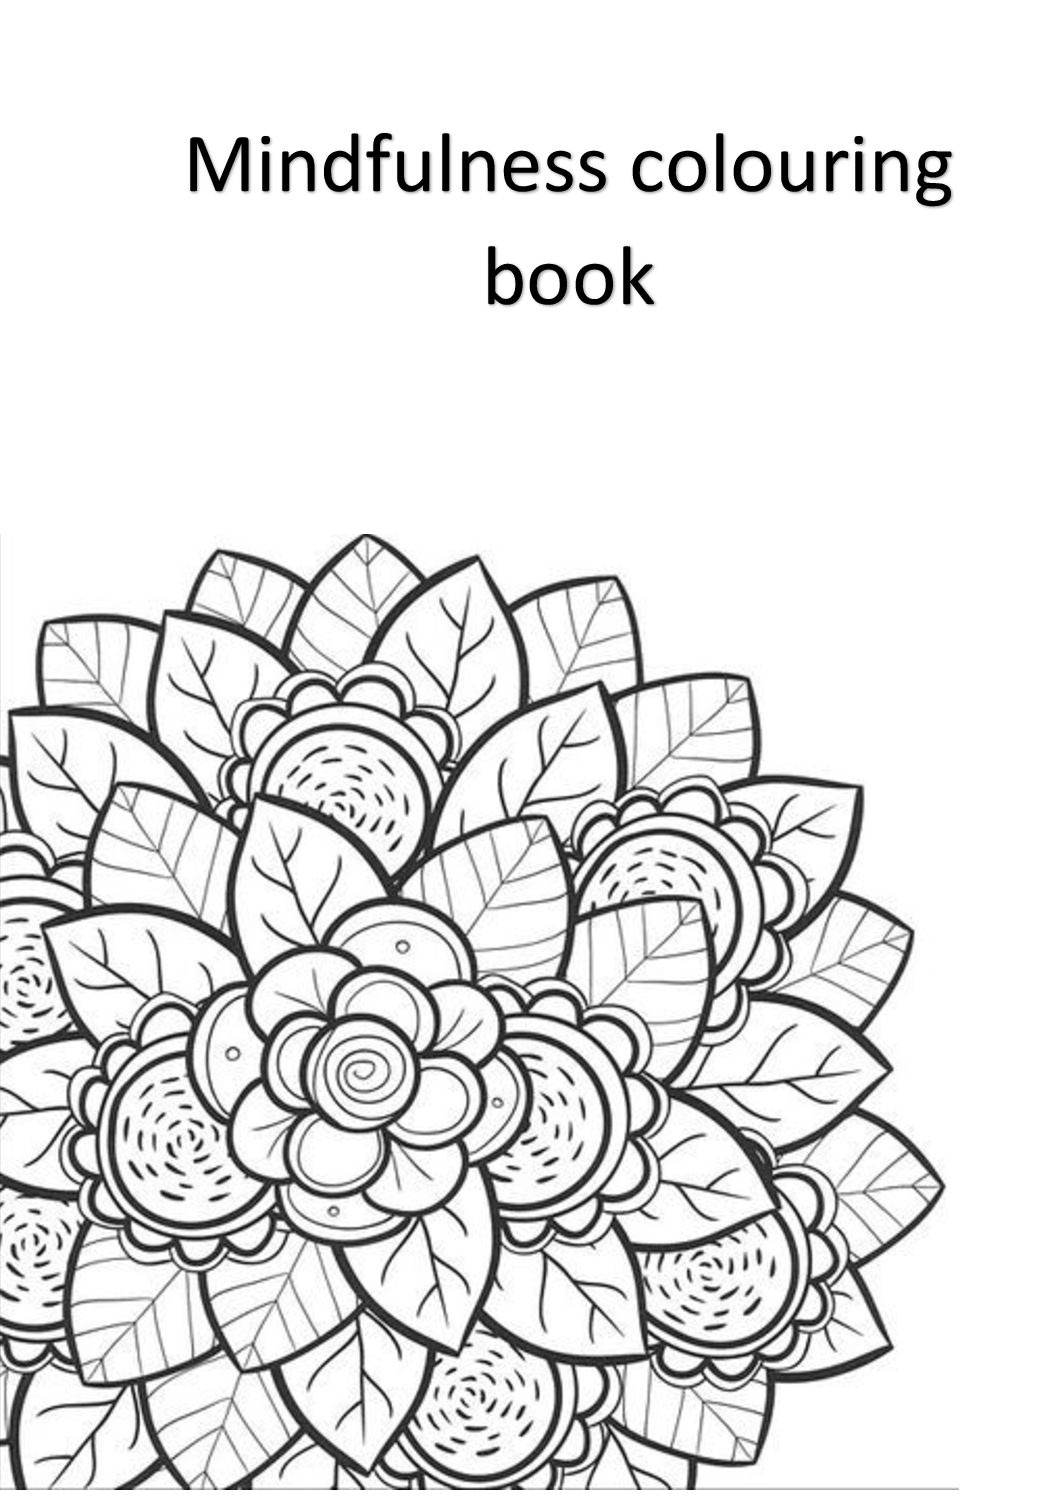 mindfulness colouring book